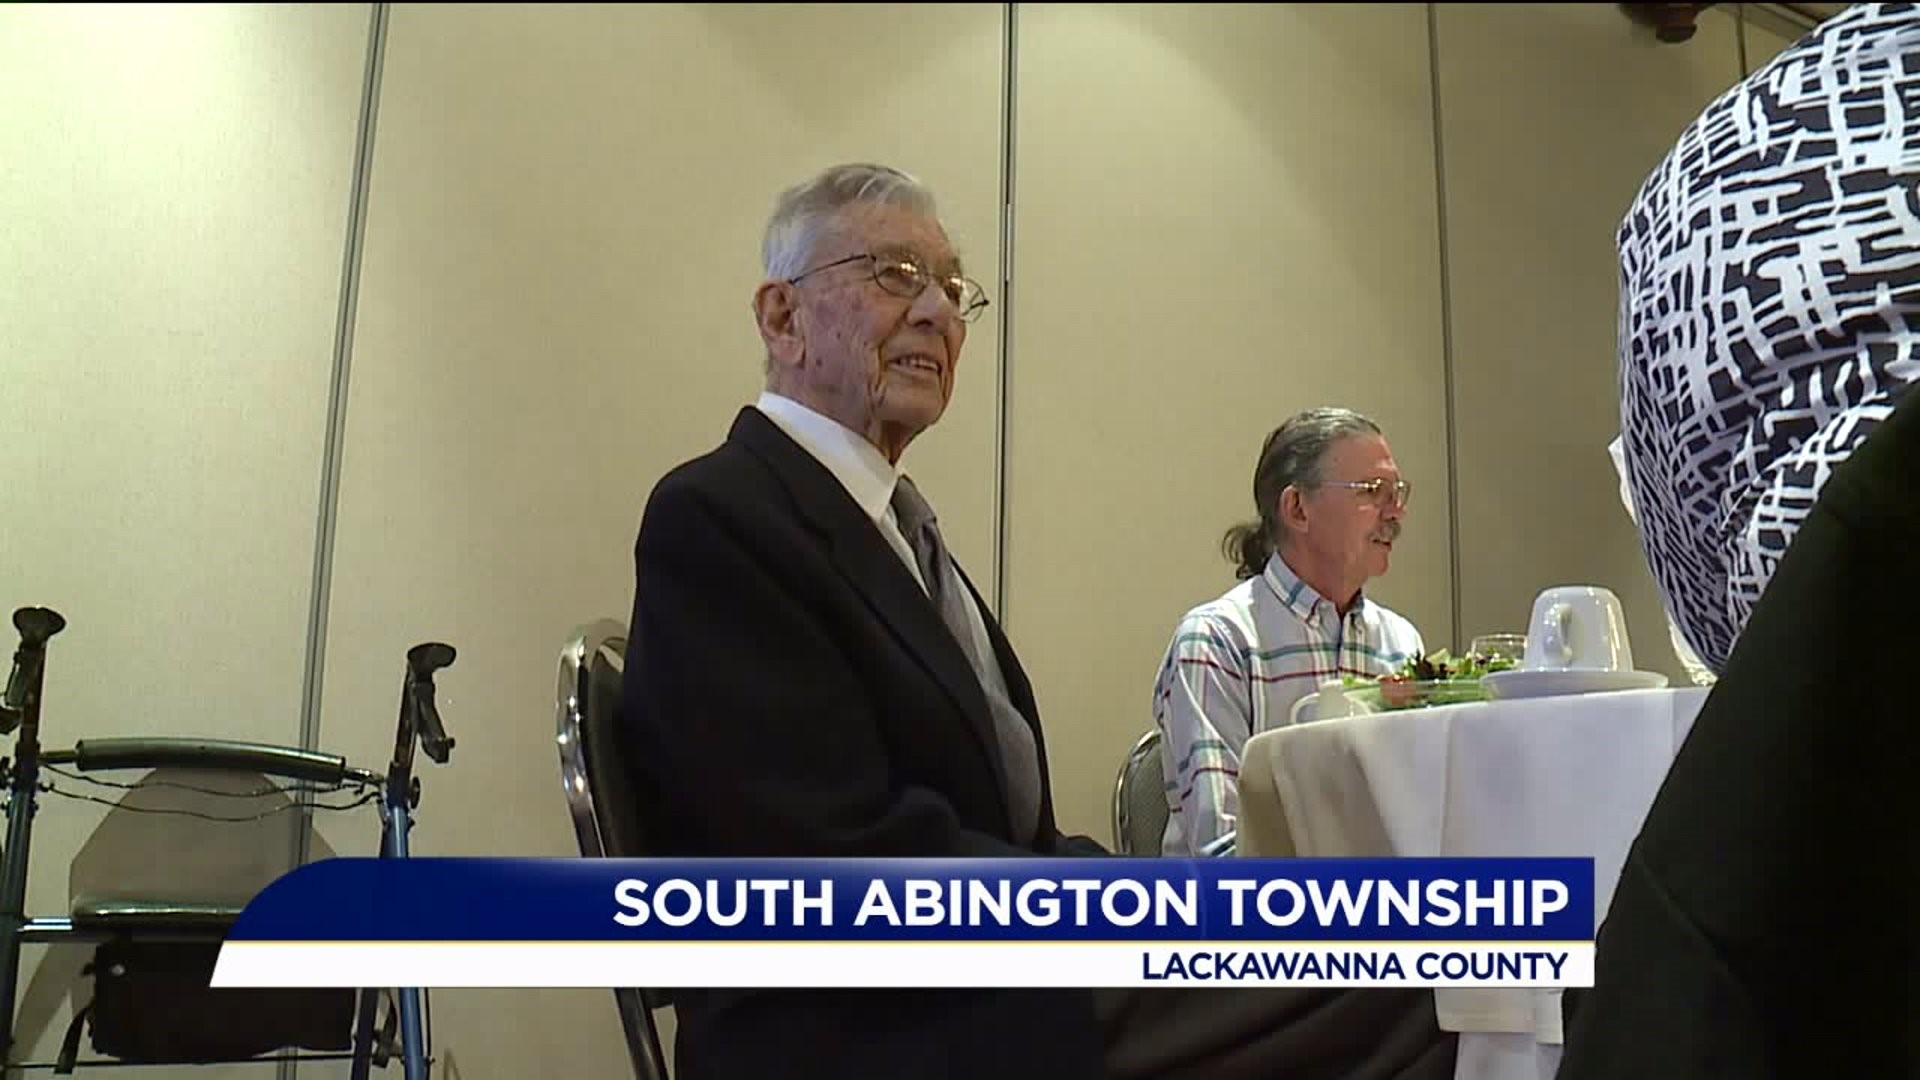 Birthday Celebration for 100-year-old in Lackawanna County